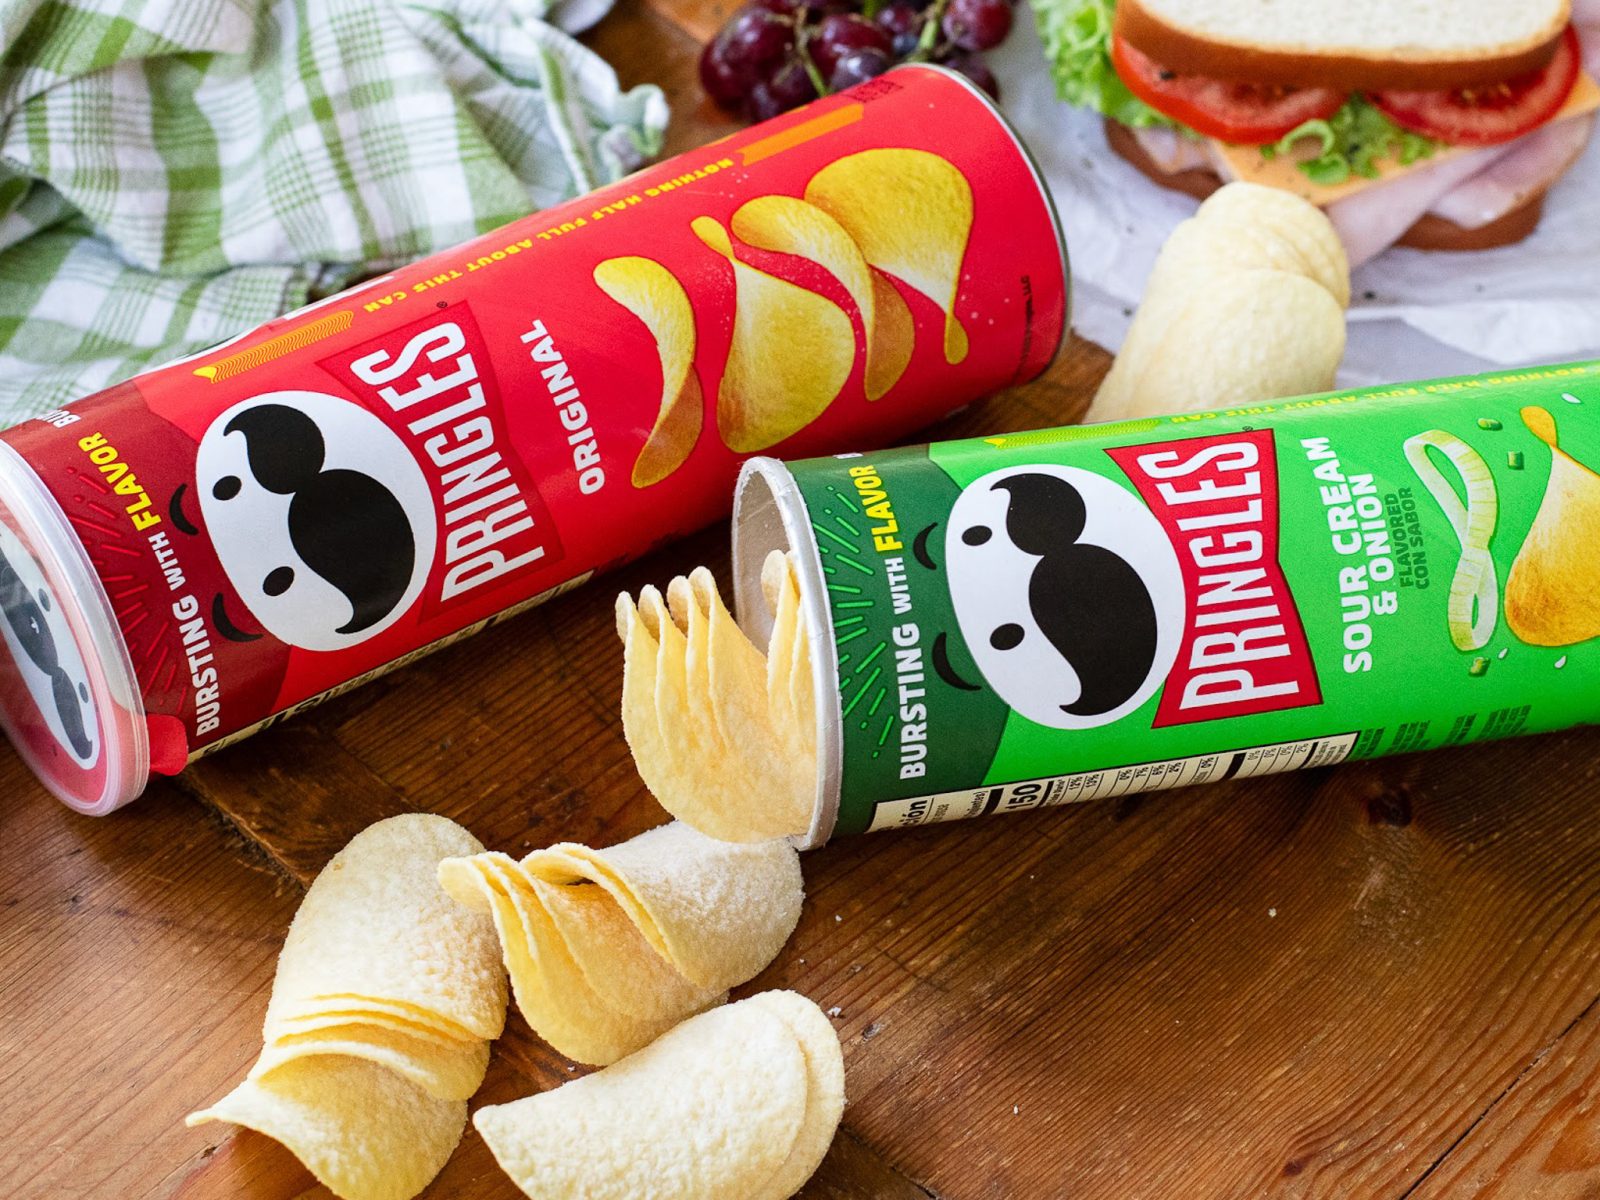 Pringles As Low As 79¢ Per Canister At Kroger